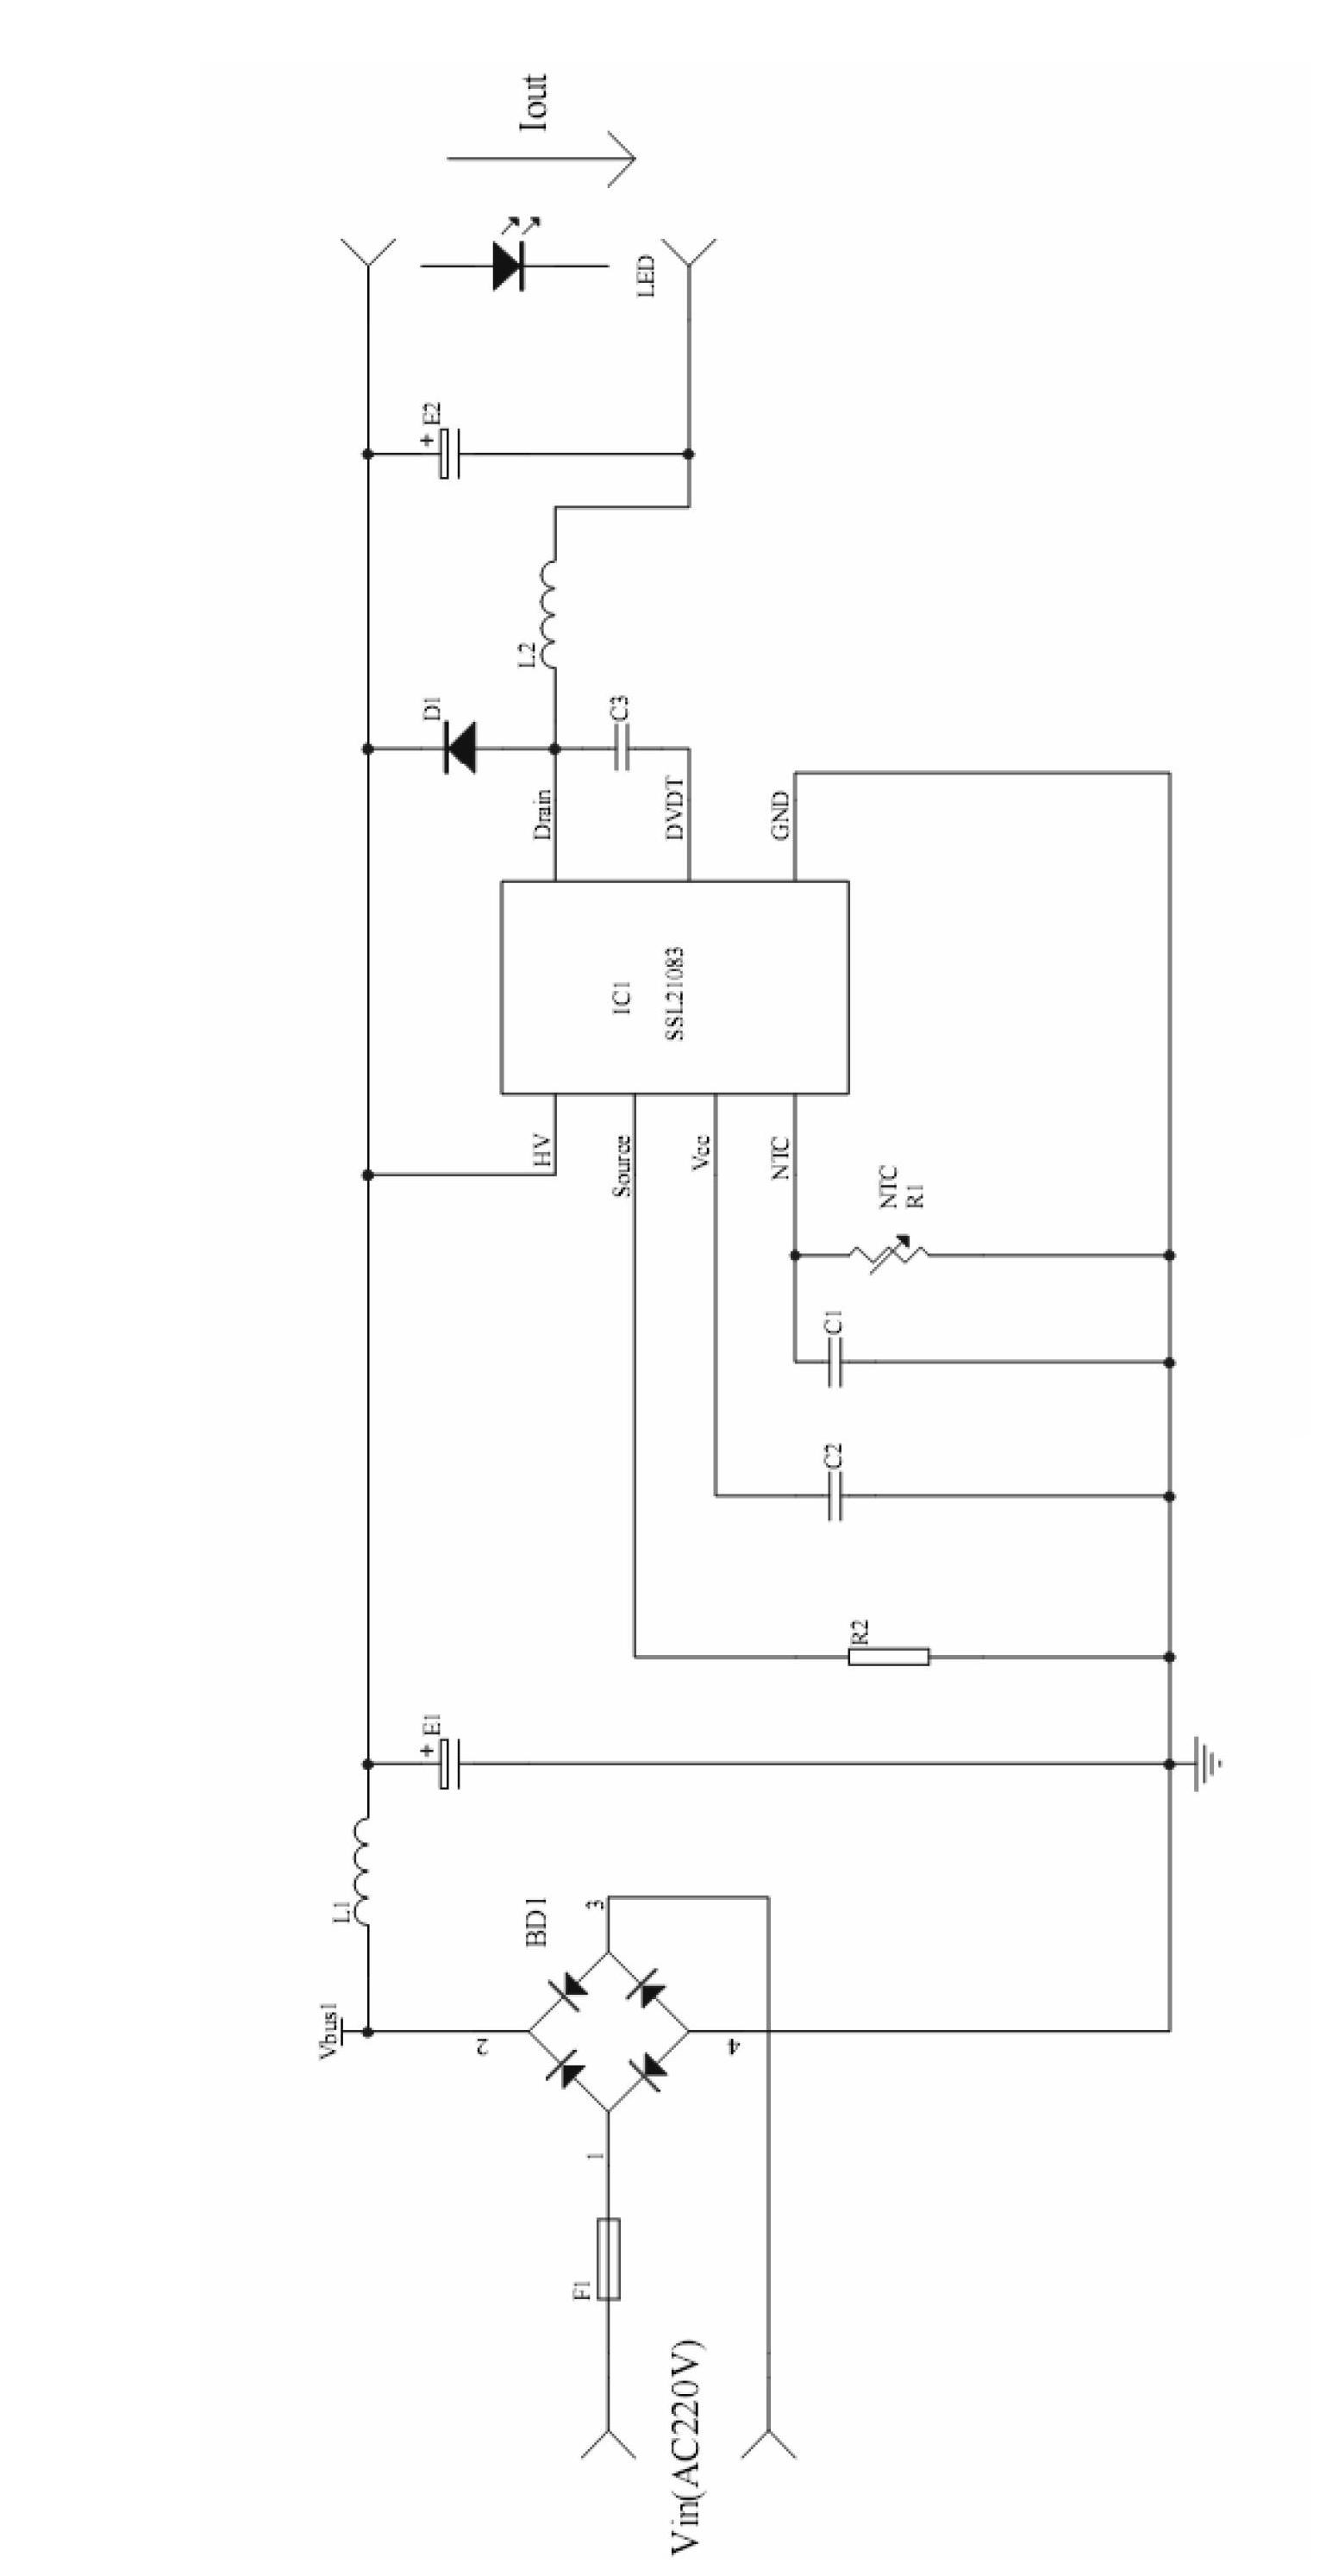 Highly-efficient light emitting diode (LED) power supply